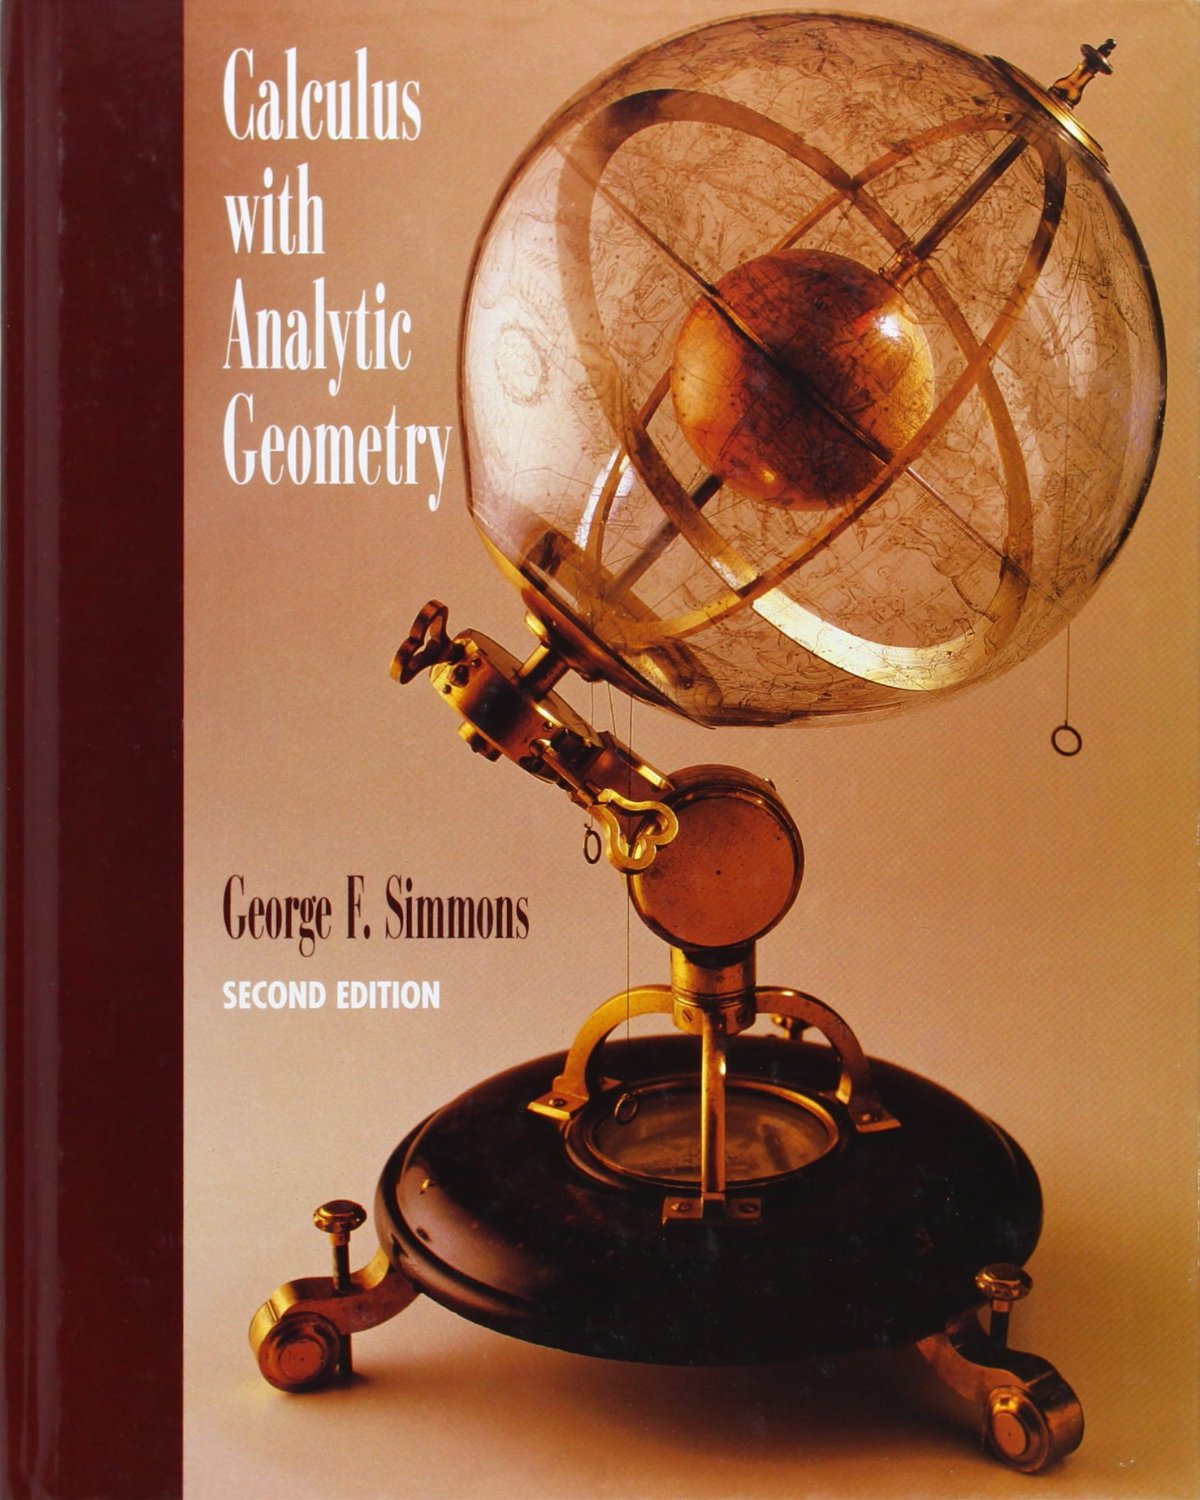 Calculus With Analytic Geometry, 2nd Edition.jpg